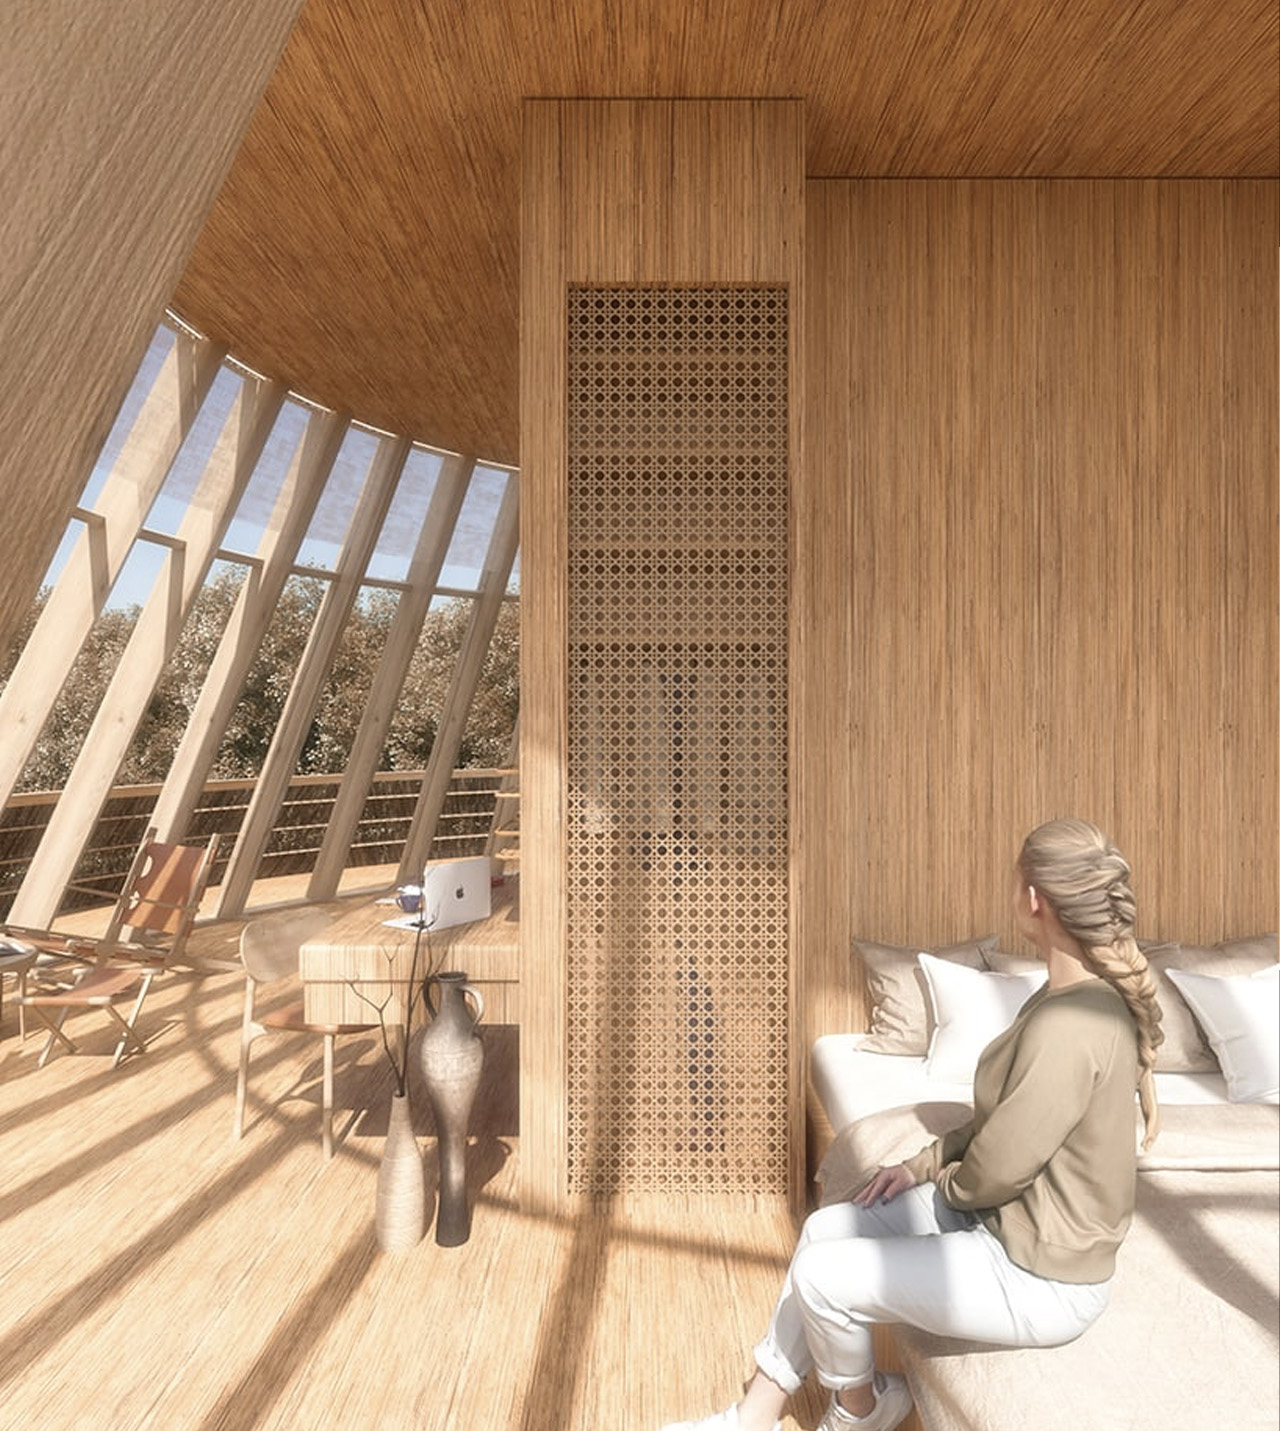 This eco-tourism safari resort in Africa pulls water out of the air using transparent solar devices